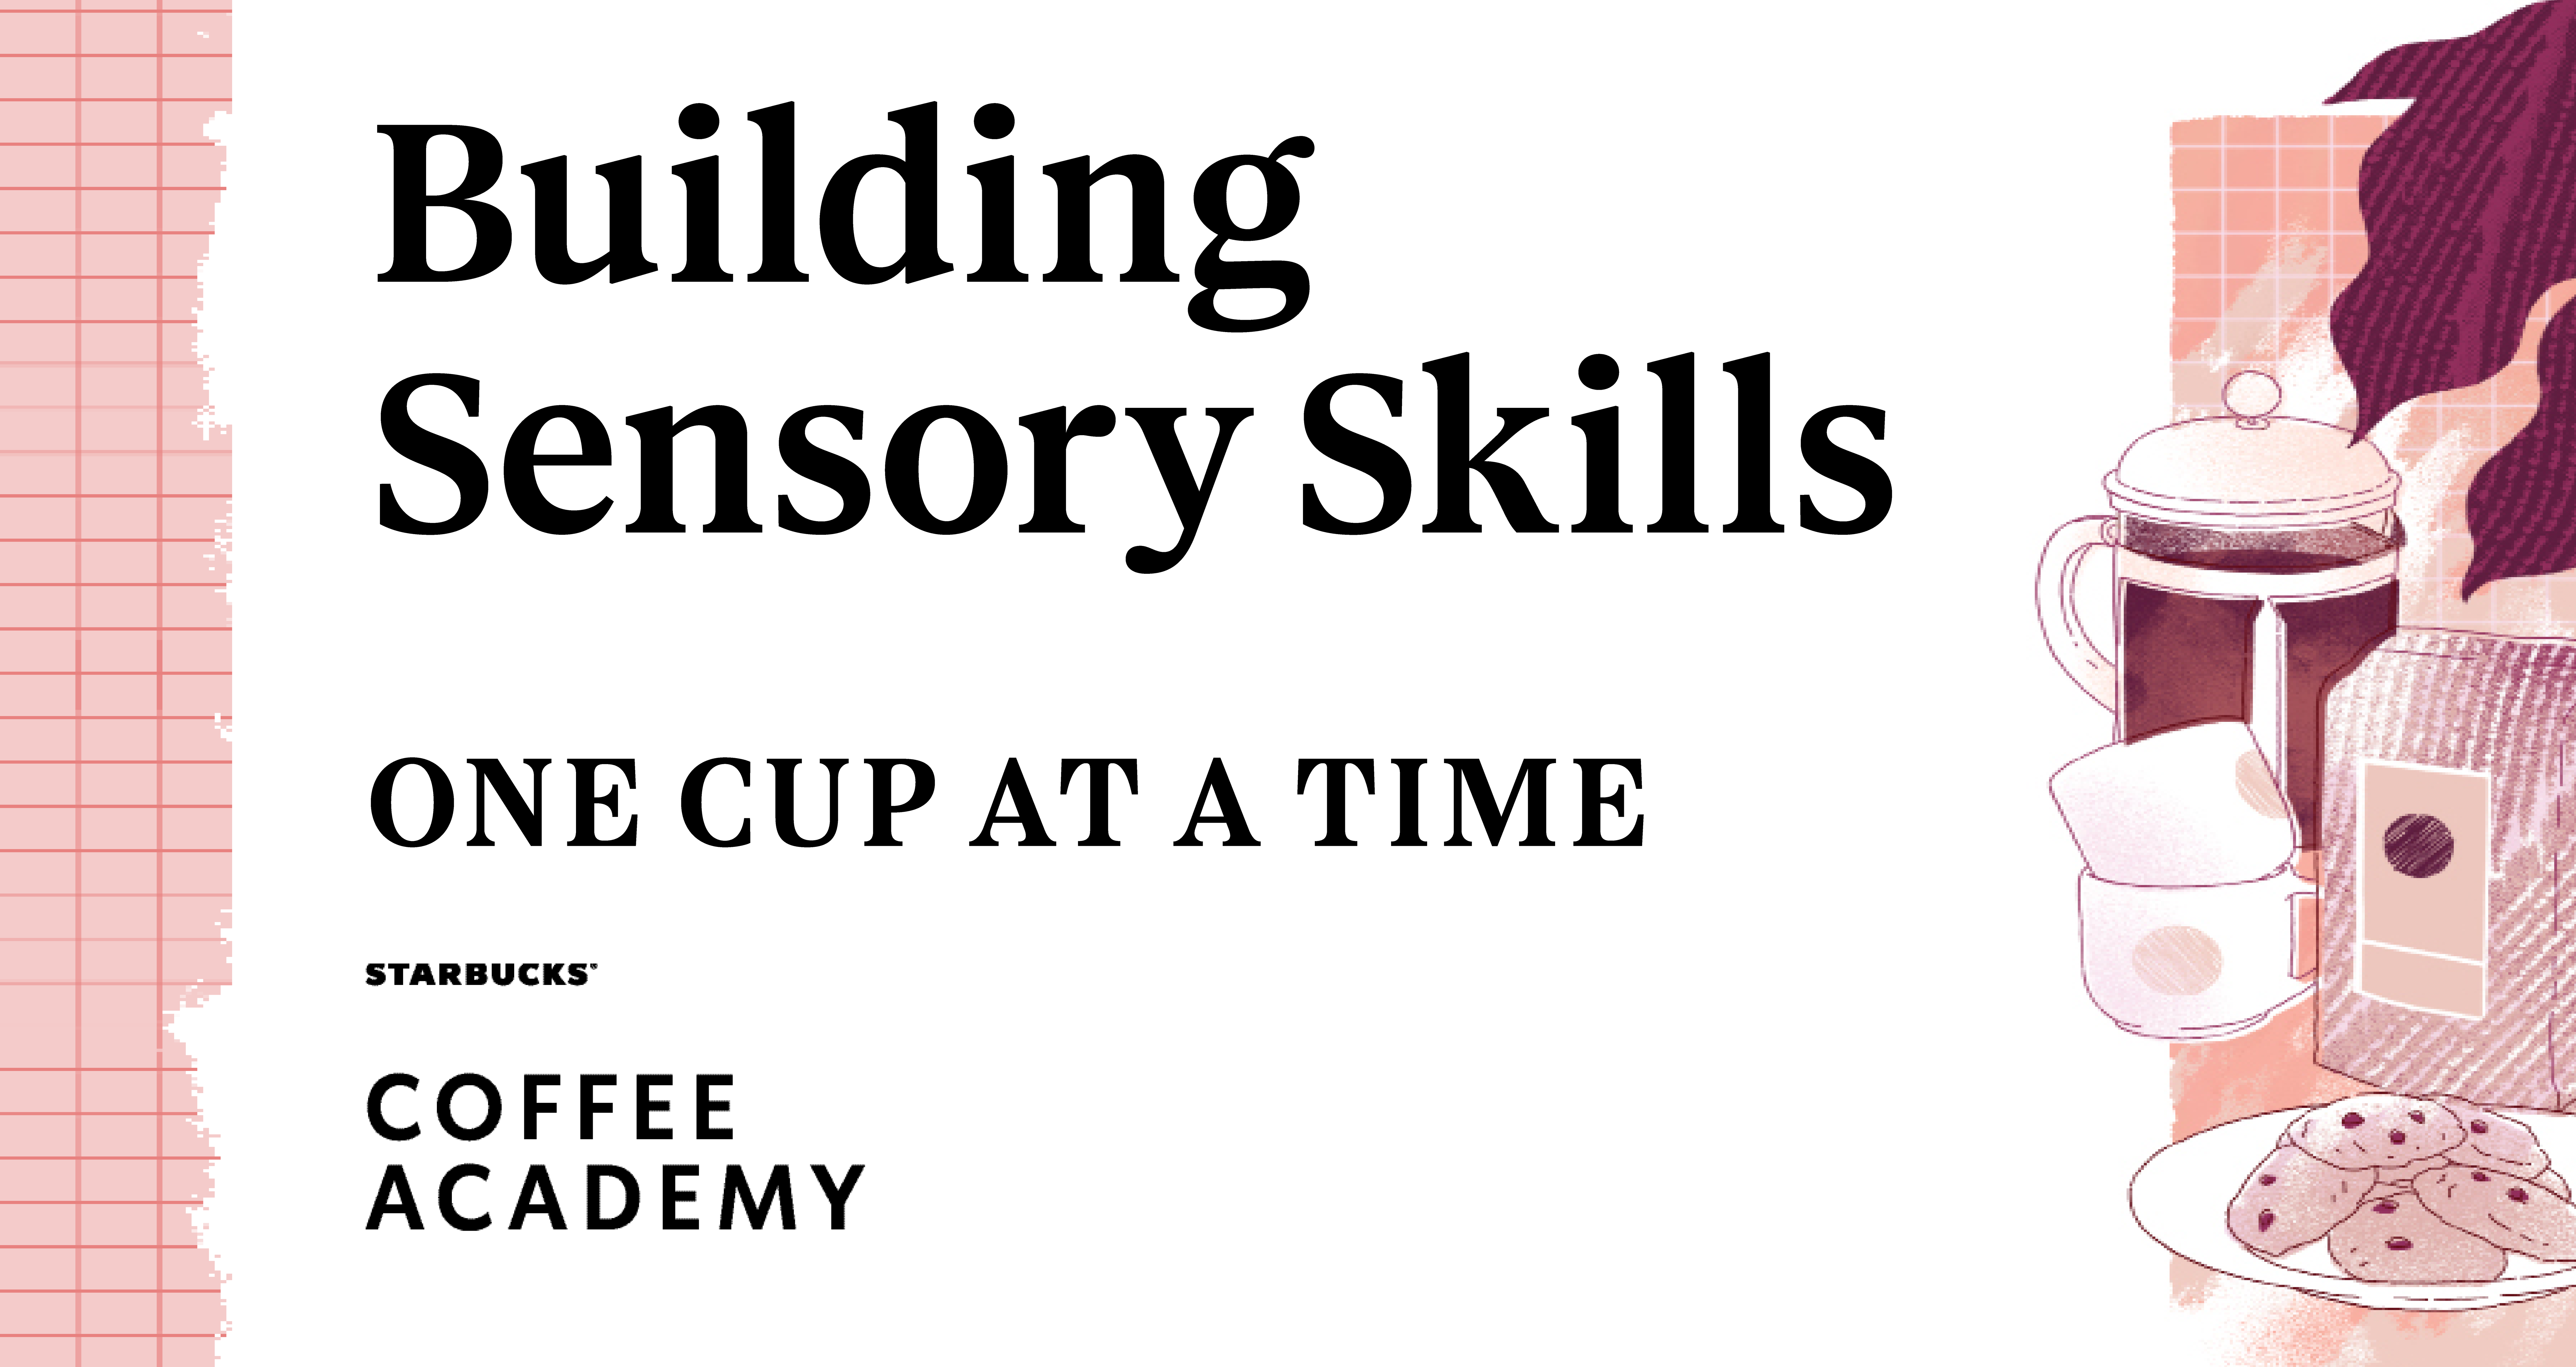 Building Sensory Skills: One Cup at a Time OCAT02